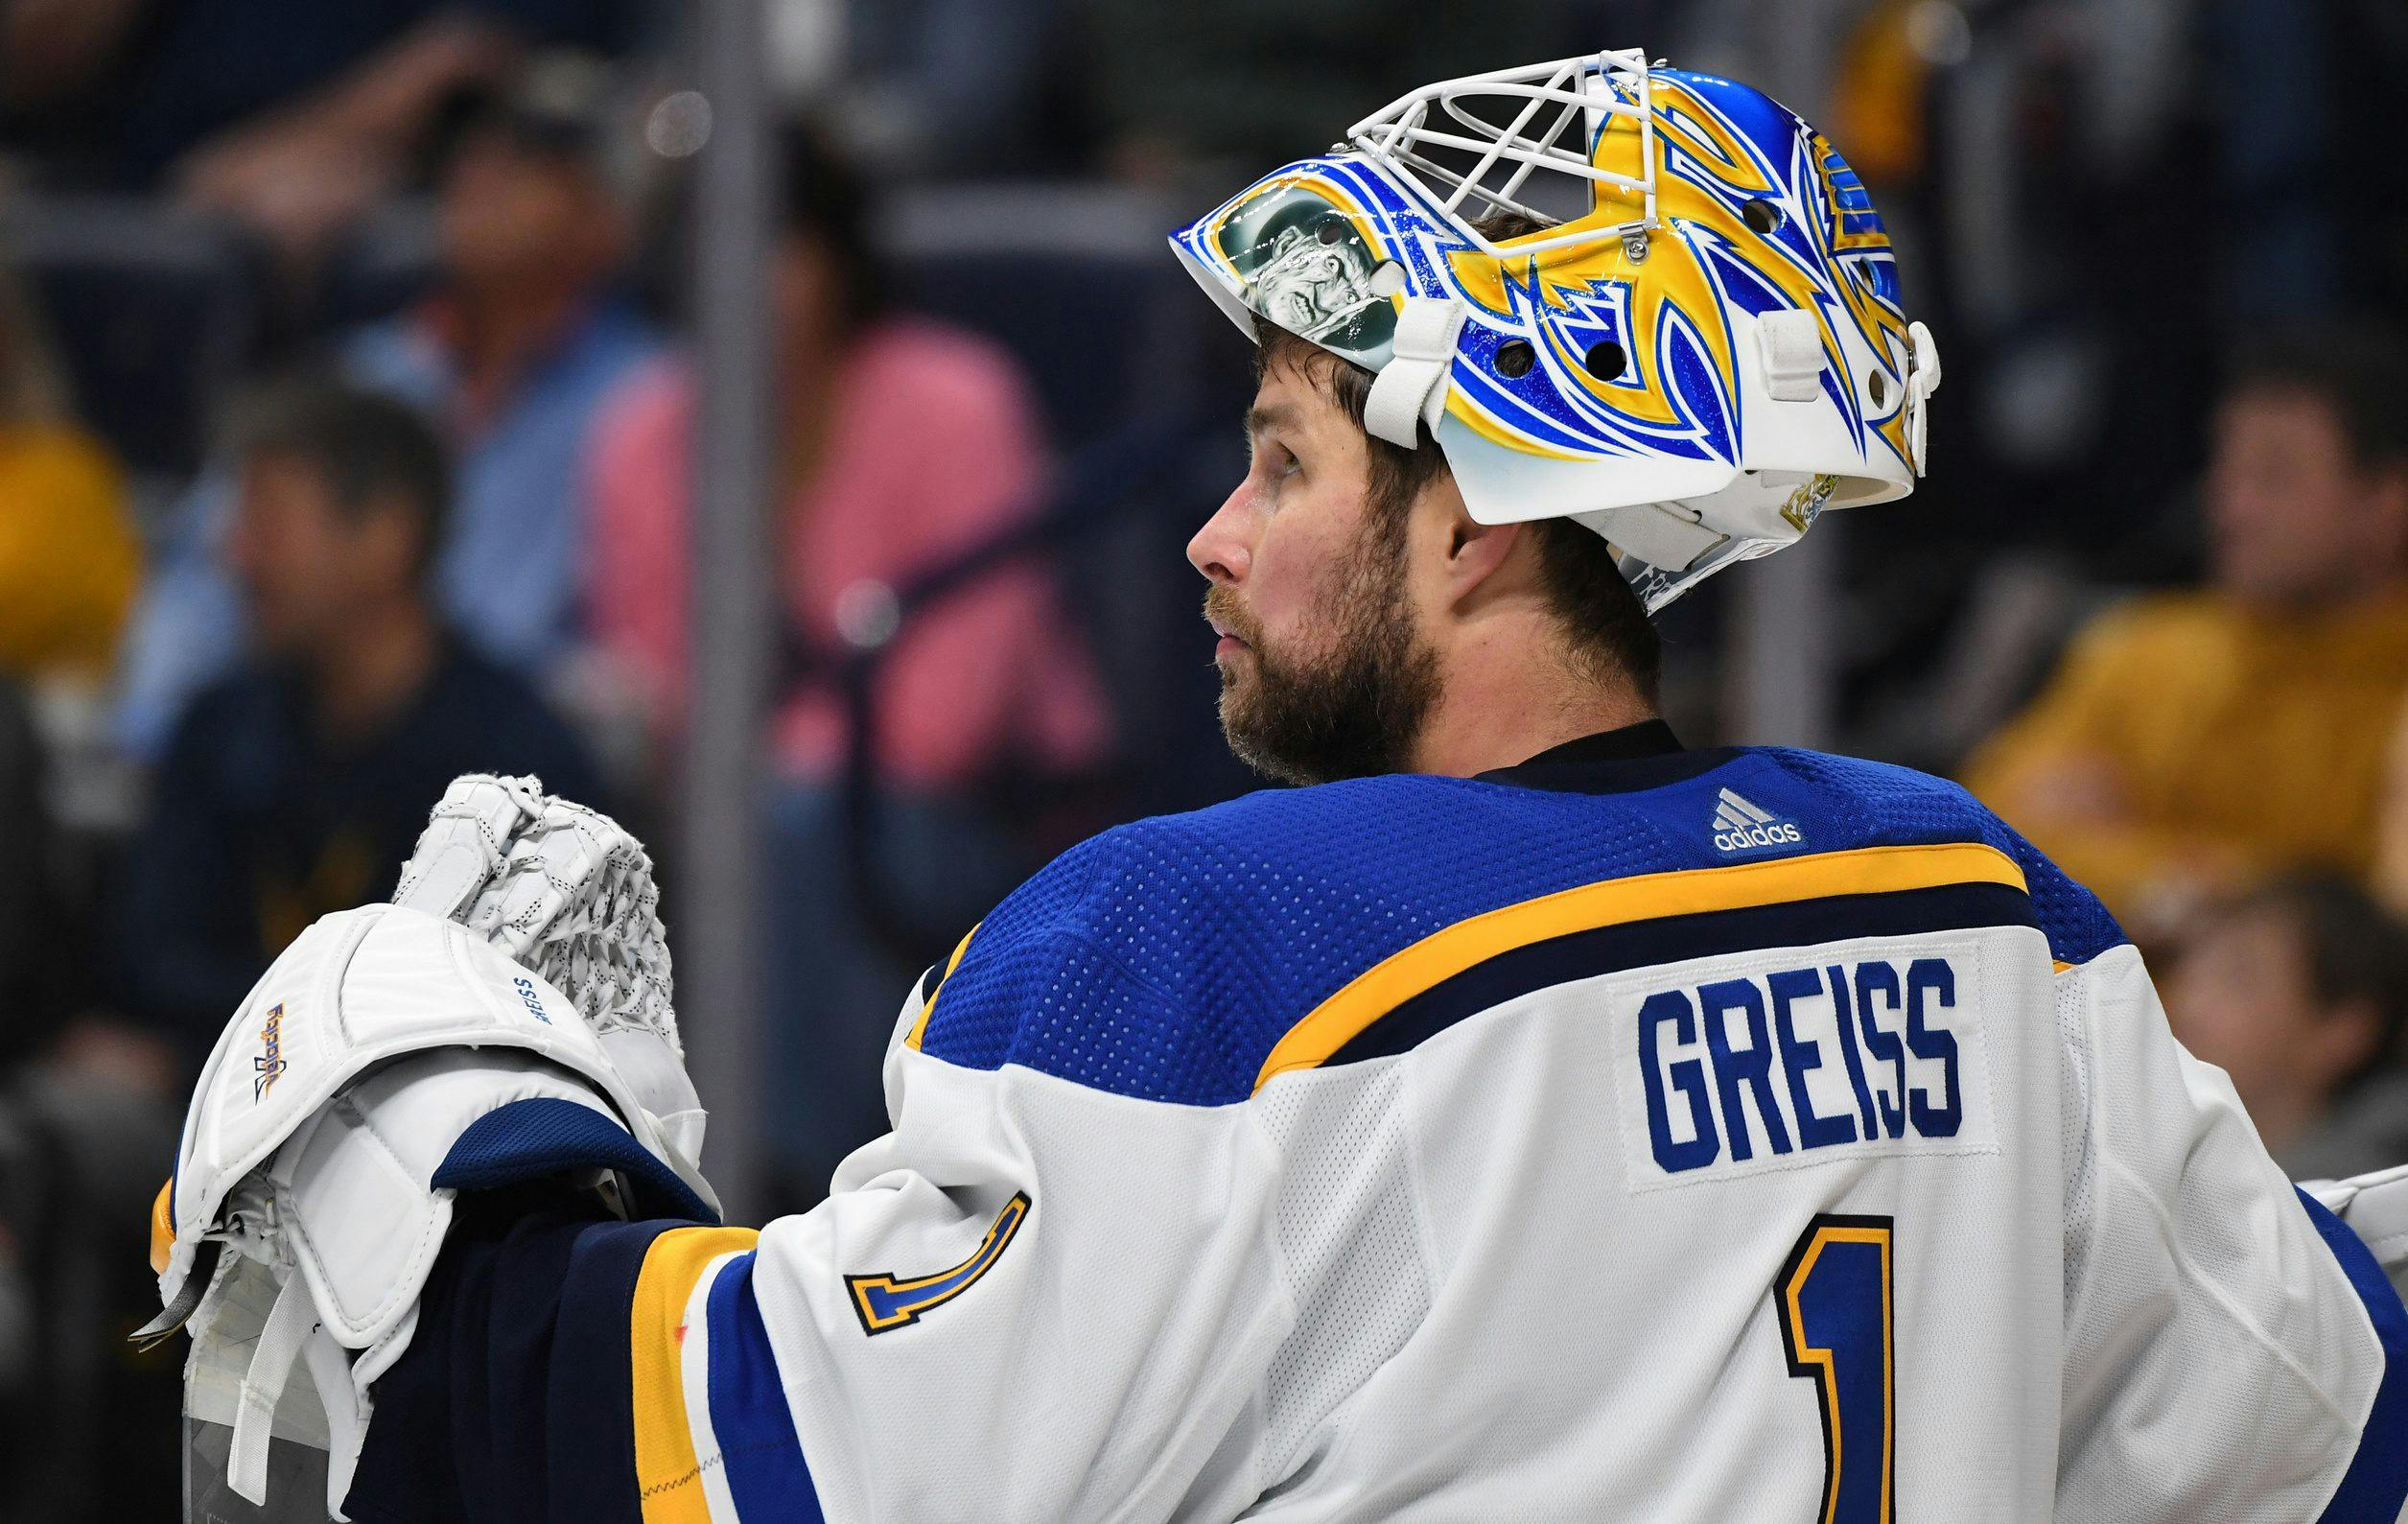 St. Louis Blues’ Thomas Greiss to miss rest of season with a lower-body injury